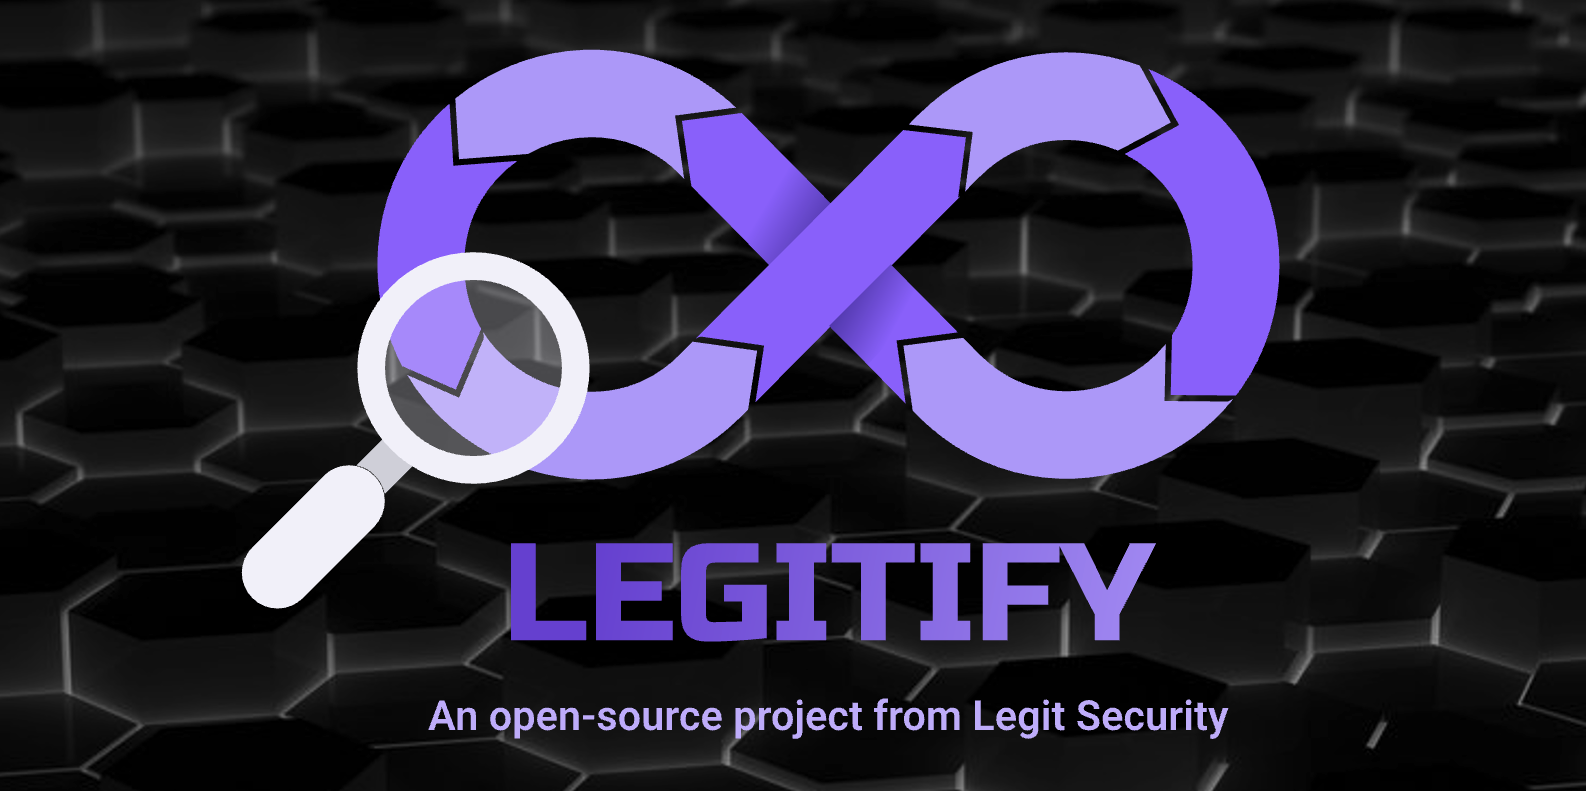 Legitify is an open-source GitHub configuration scanner from Legit Security that helps manage & enforce GitHub configurations in a secure and scalable way